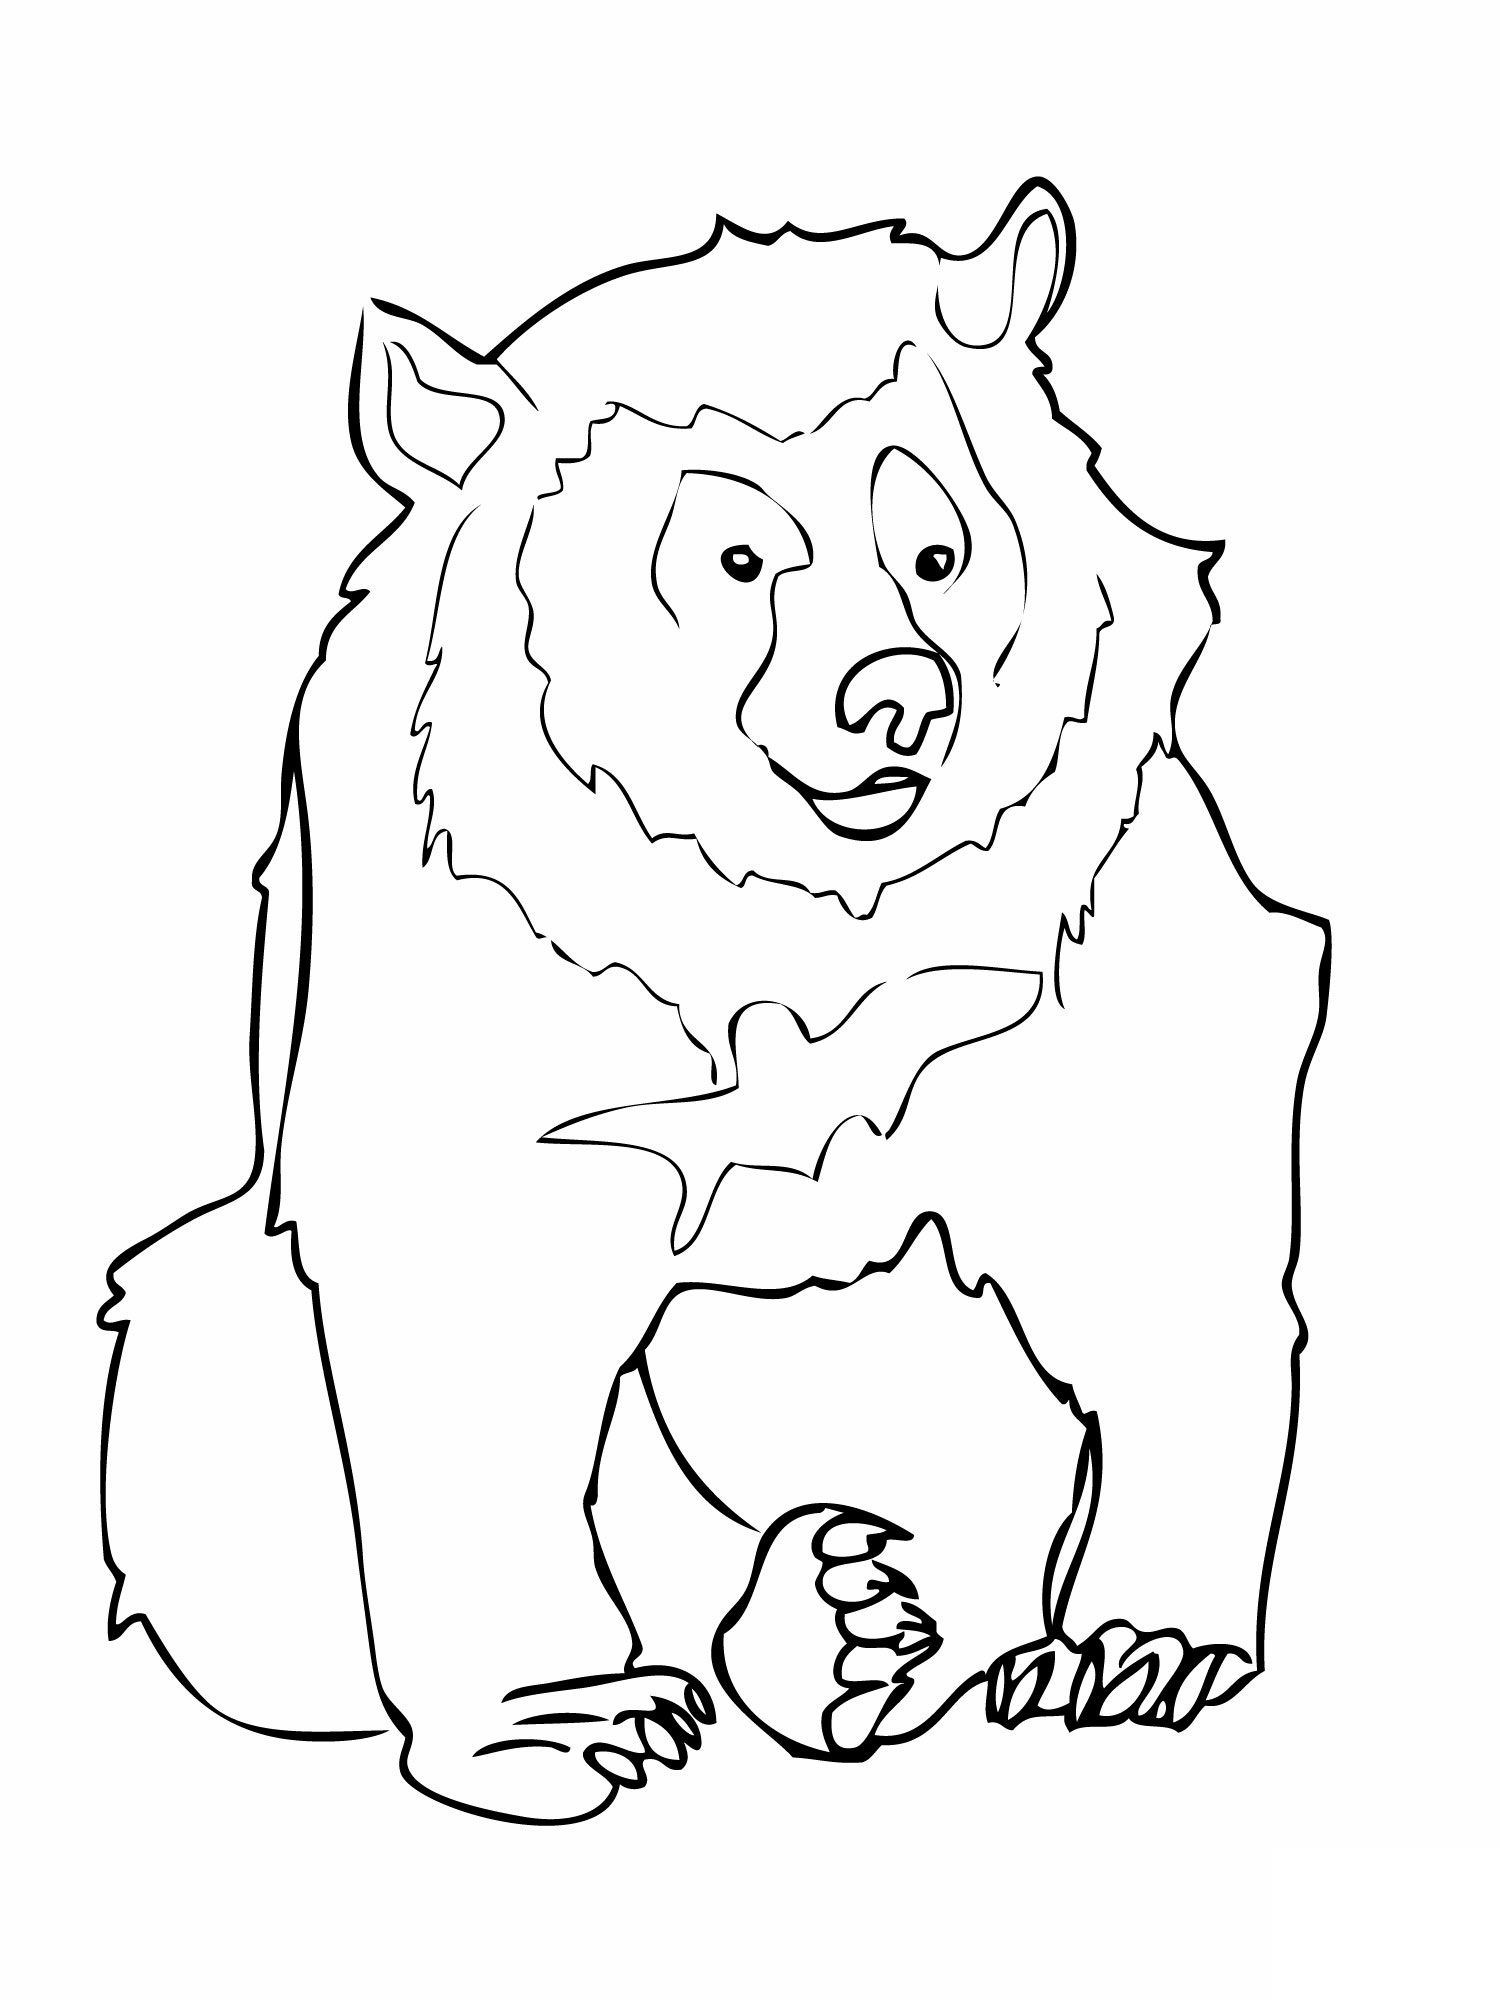 grizzly bear coloring page